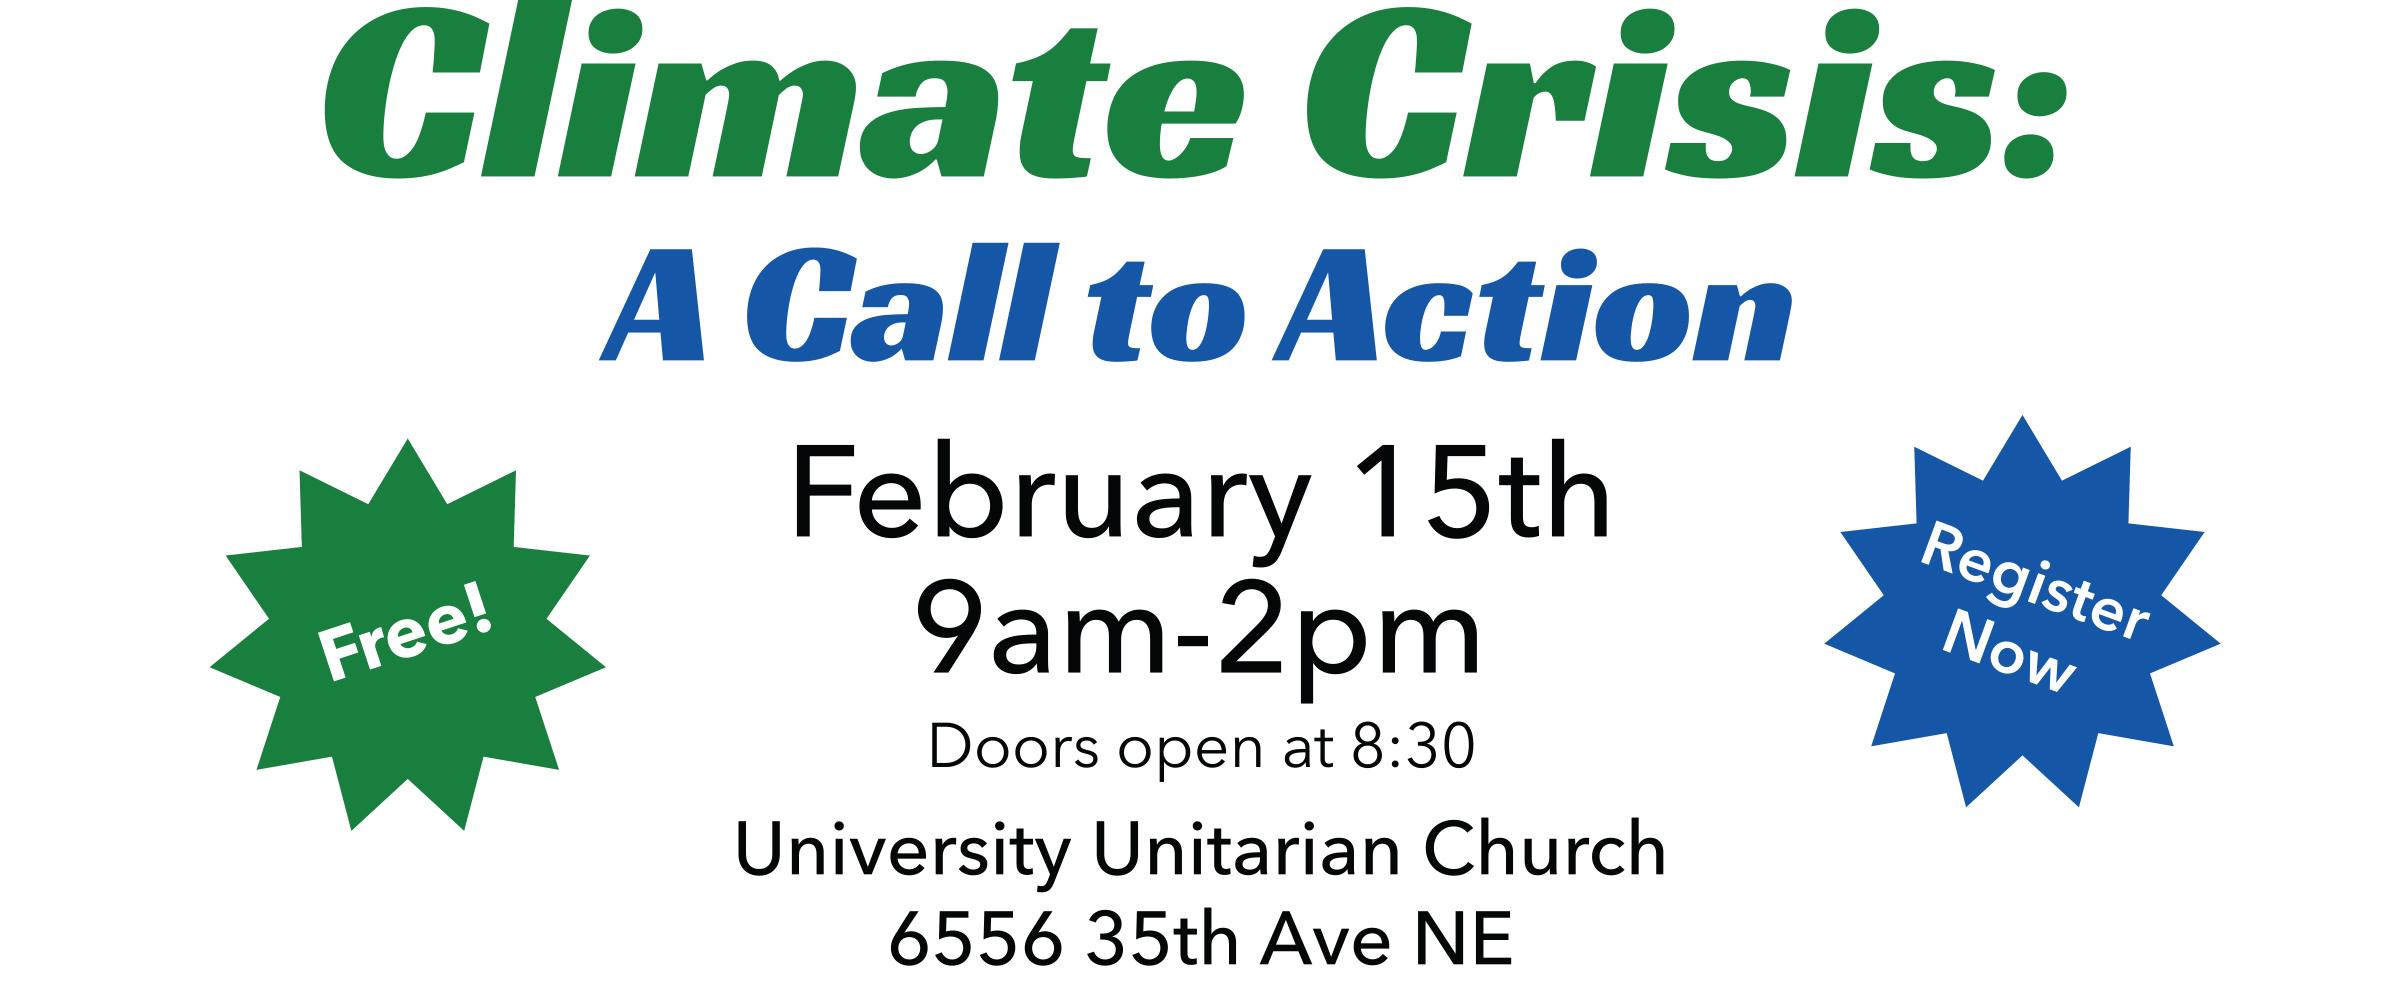 Climate Crisis: A Call to Action